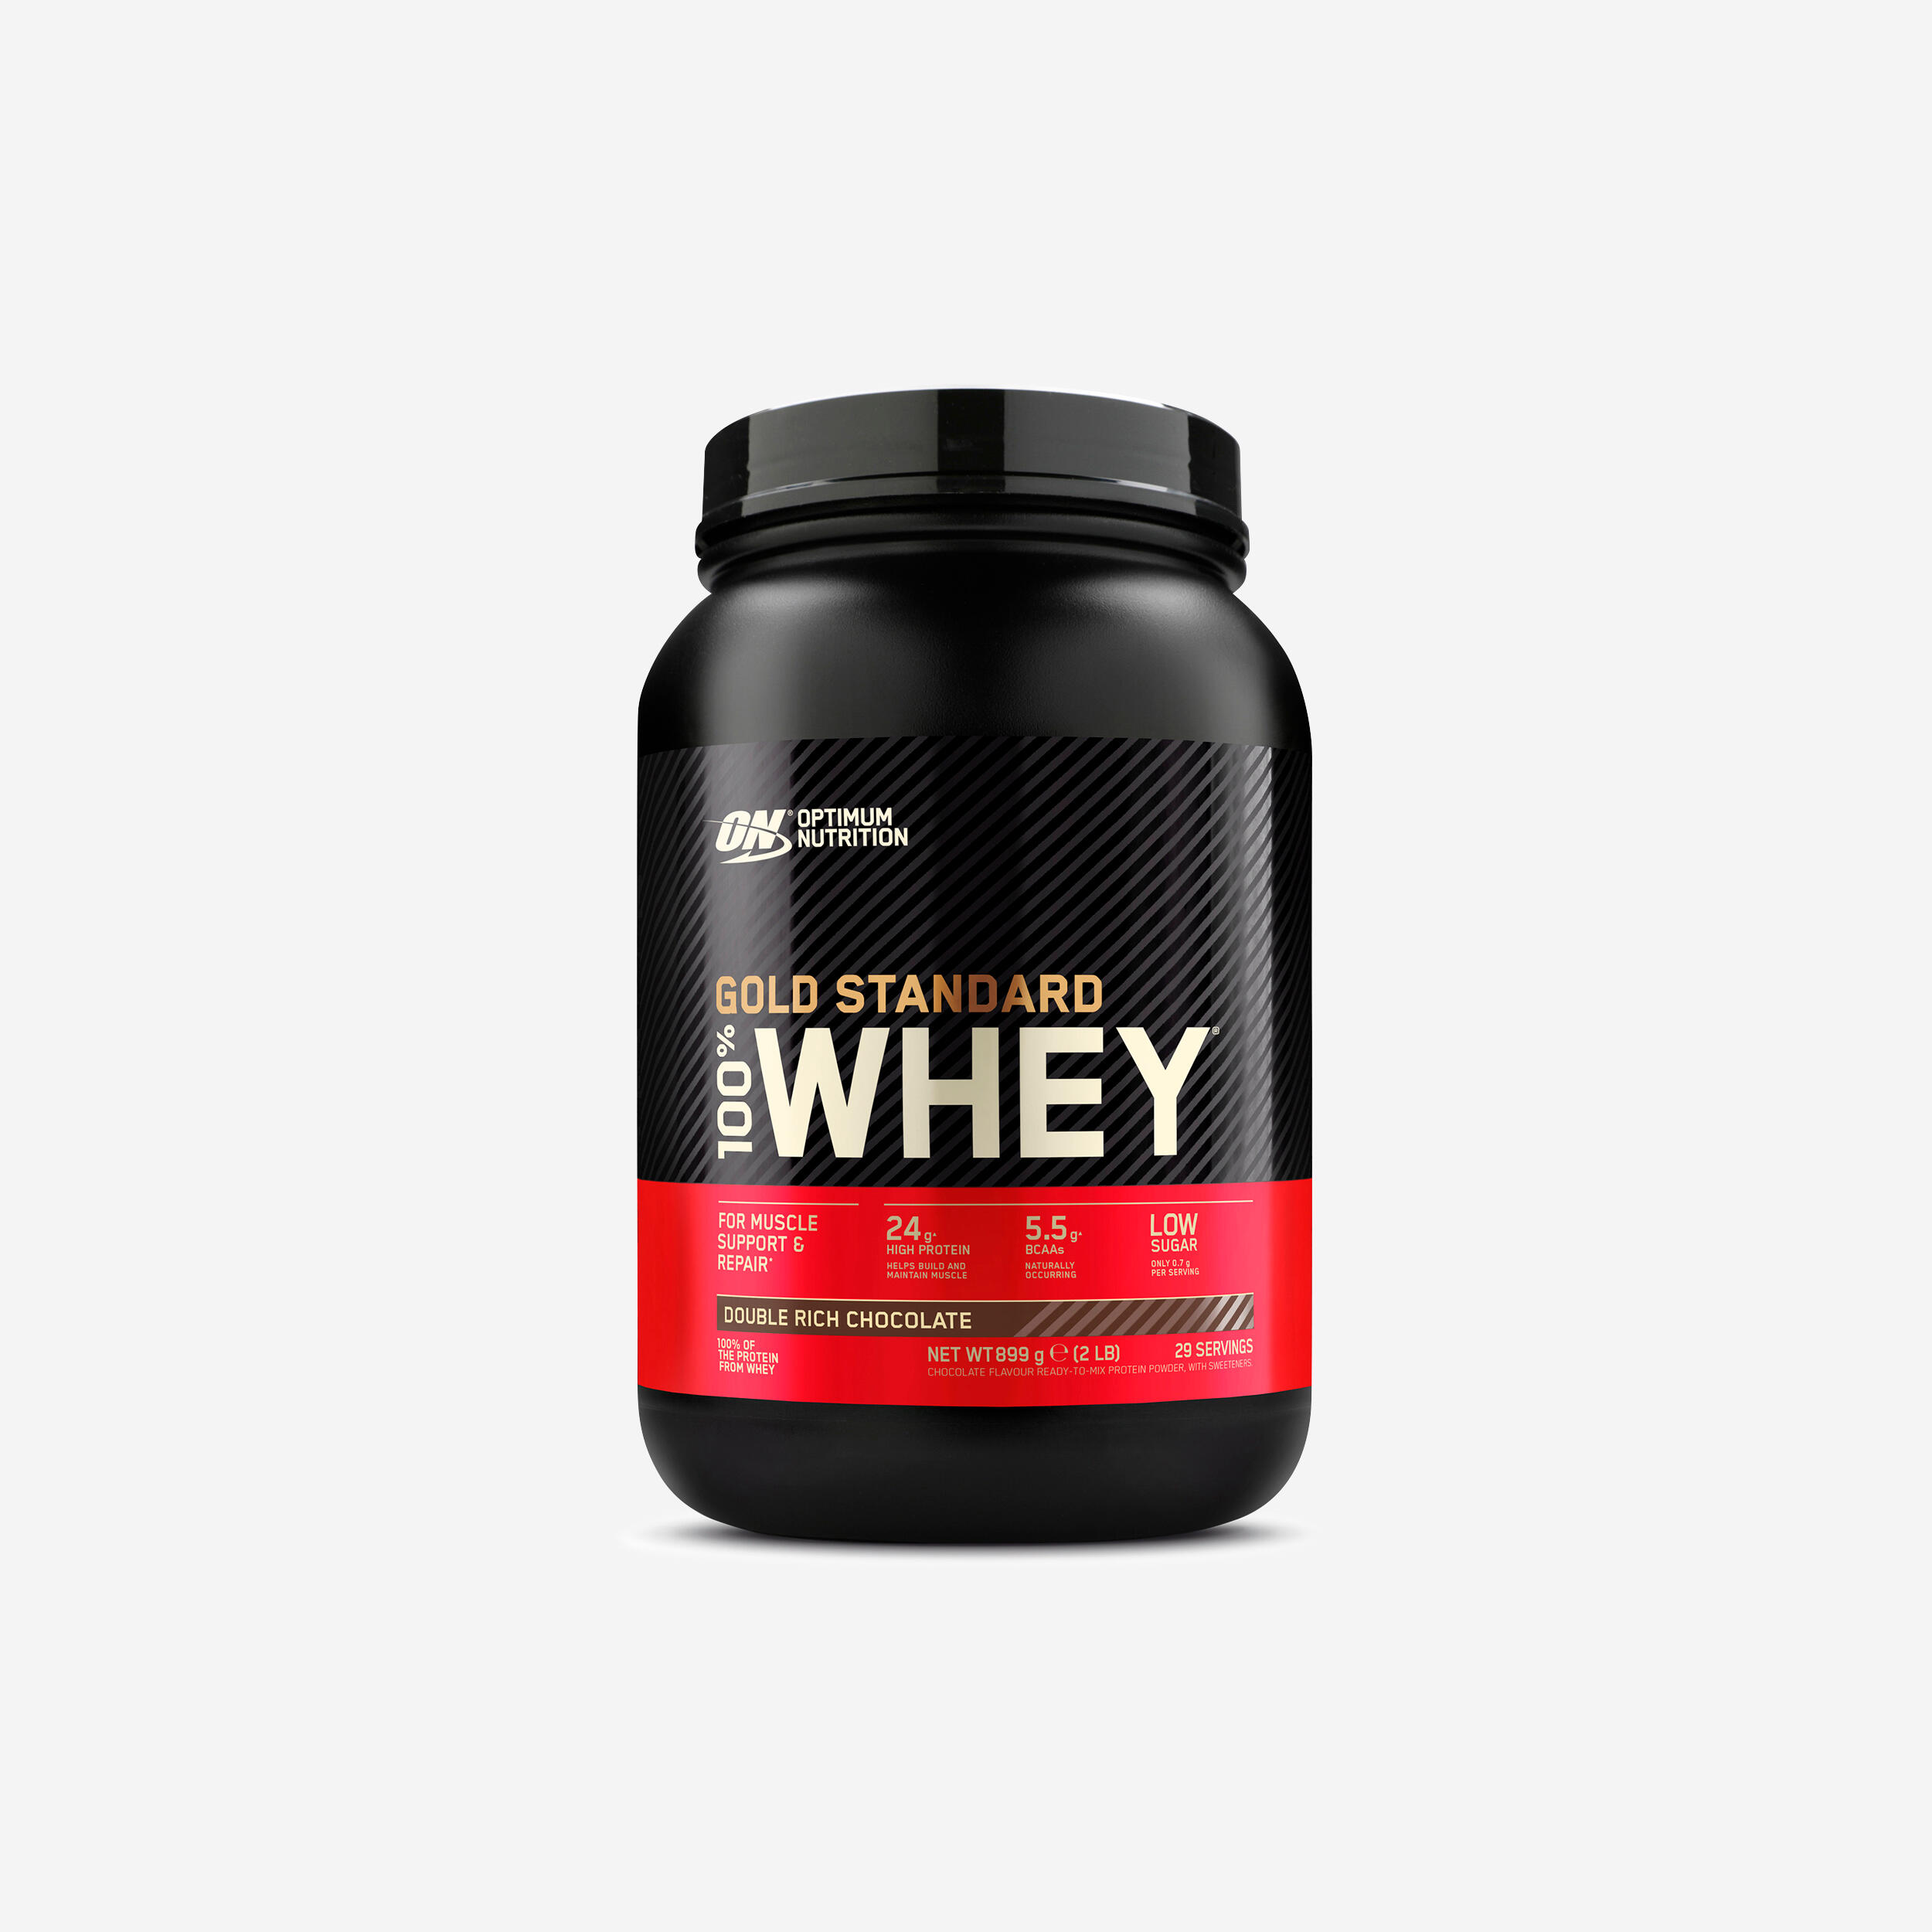 OPTIMUM NUTRITION 908 g Whey Protein Gold Standard - Double Rich Chocolate